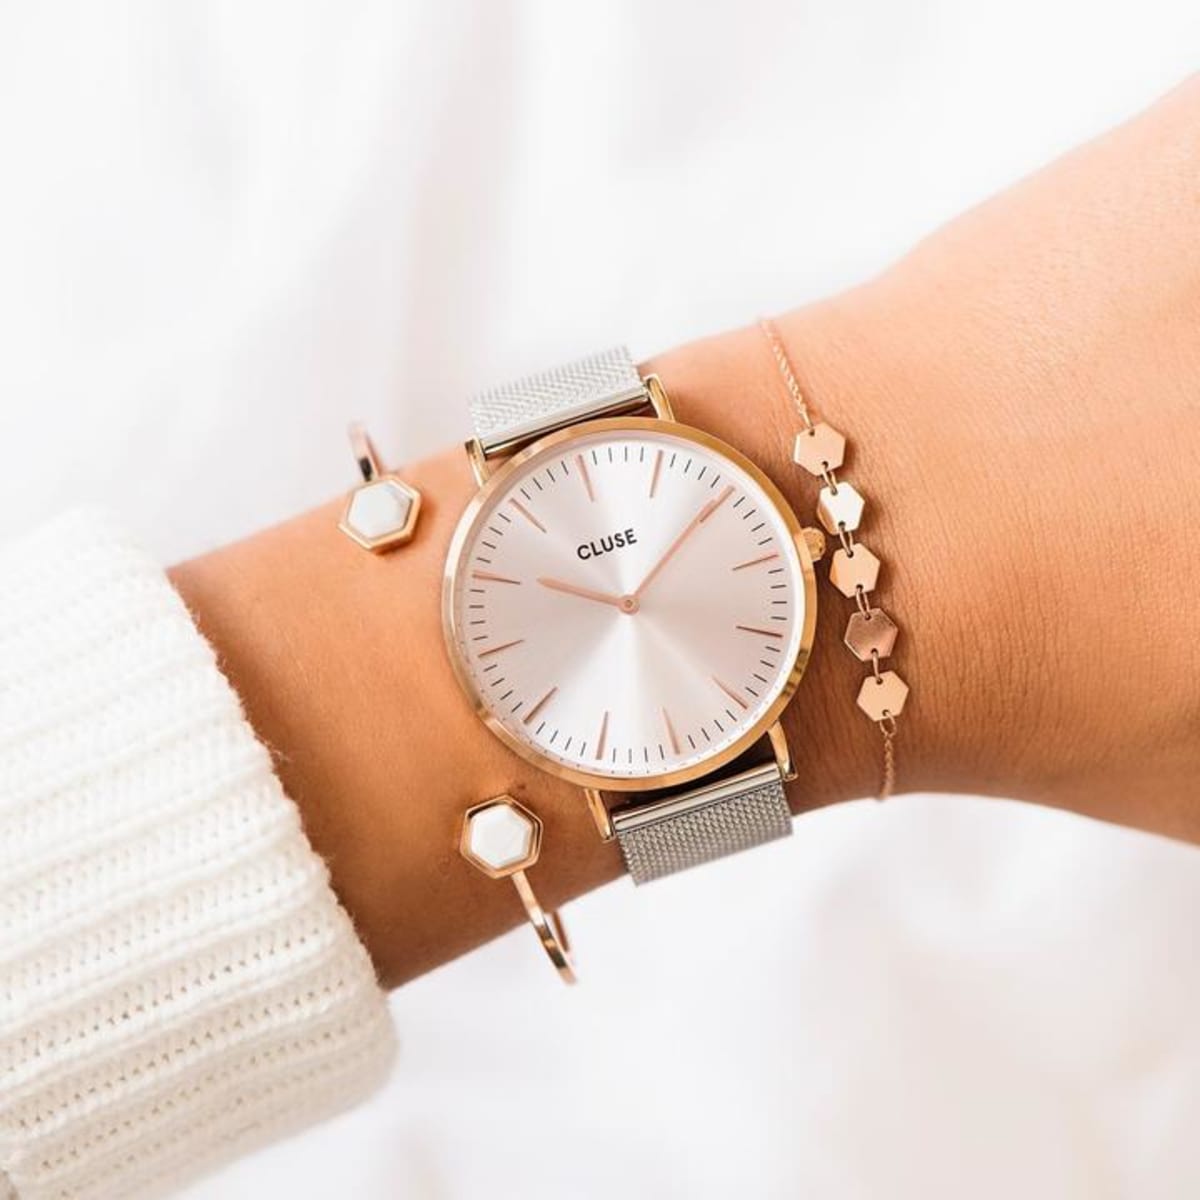 The iridescence of precious metal shades, fresh and feminine, fills every moment with the lightness of a new beginning. Presented in a grey leatherette pouch. As with all our watches in the Boho Chic collection, you can easily customise this watch with any Boho Chic or La Roche leather or mesh strap.